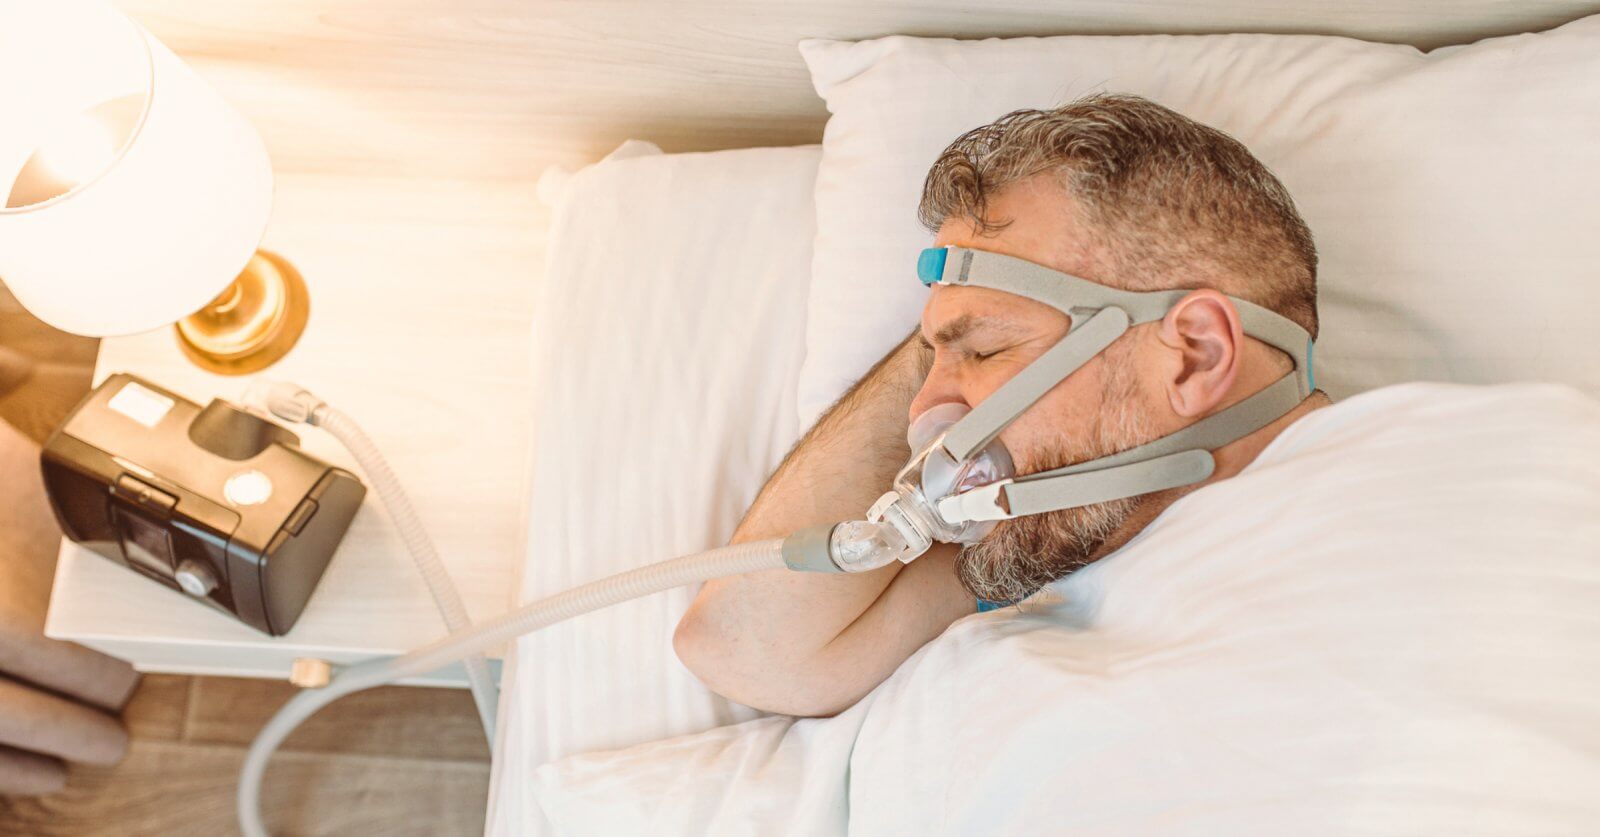 A man sleeps in a sunlit bedroom using a CPAP machine purchased from one of the top CPAP stores in Metro Manila. He lies on his side, with his head on a pillow, wearing a head strap connected to a nasal mask. A nightstand with a lamp is visible beside him.